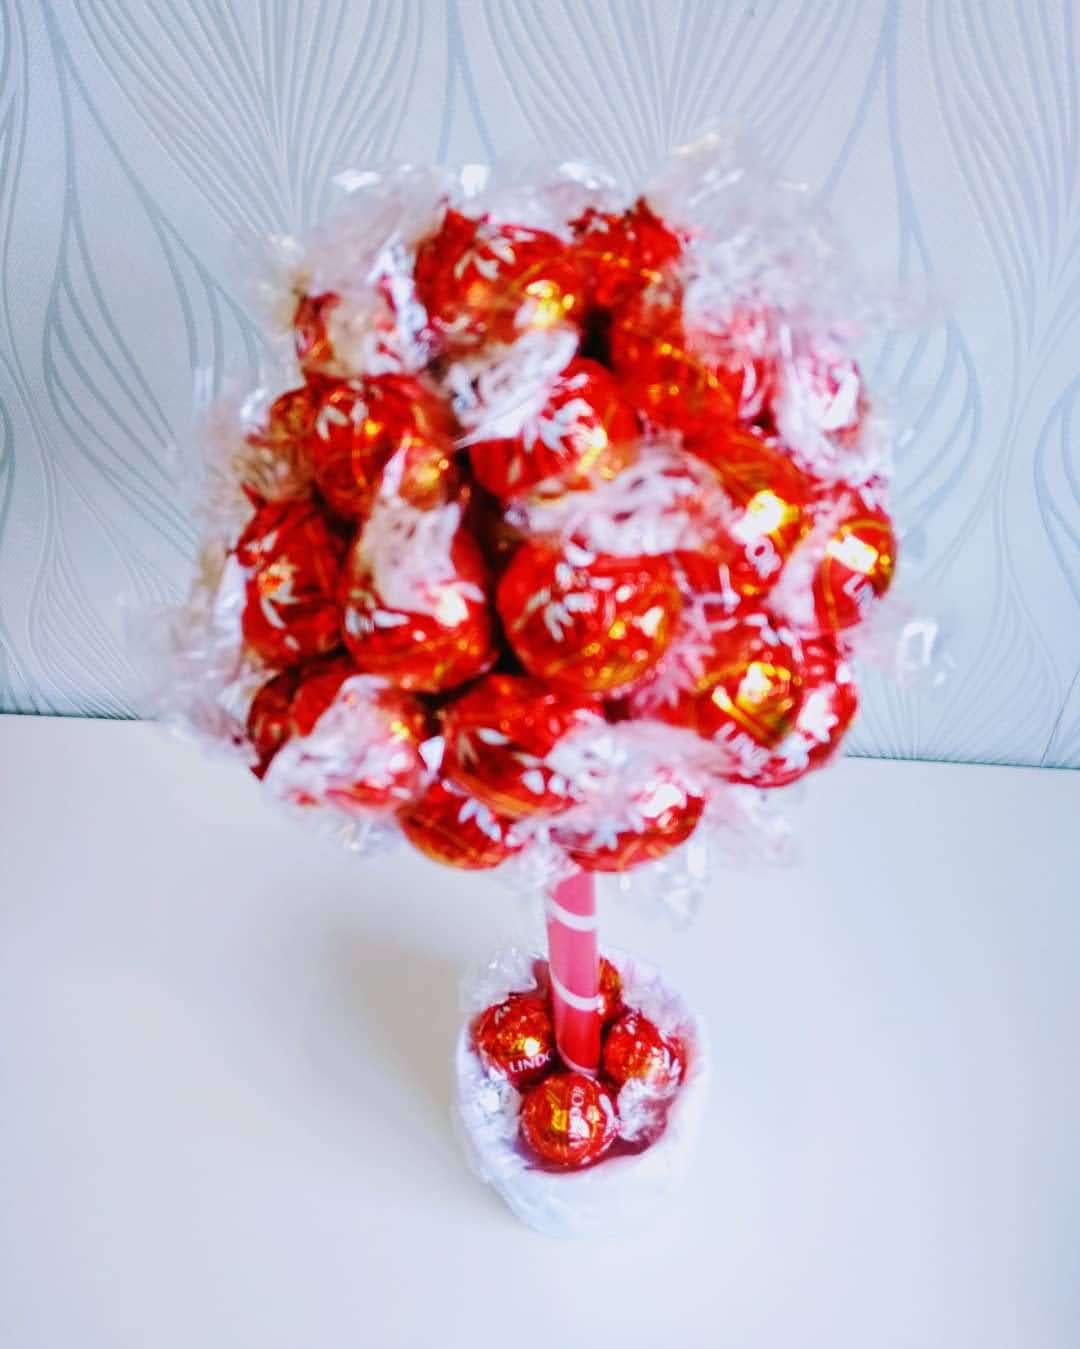 Buy tasty Lindt Sweet Tree for your friend